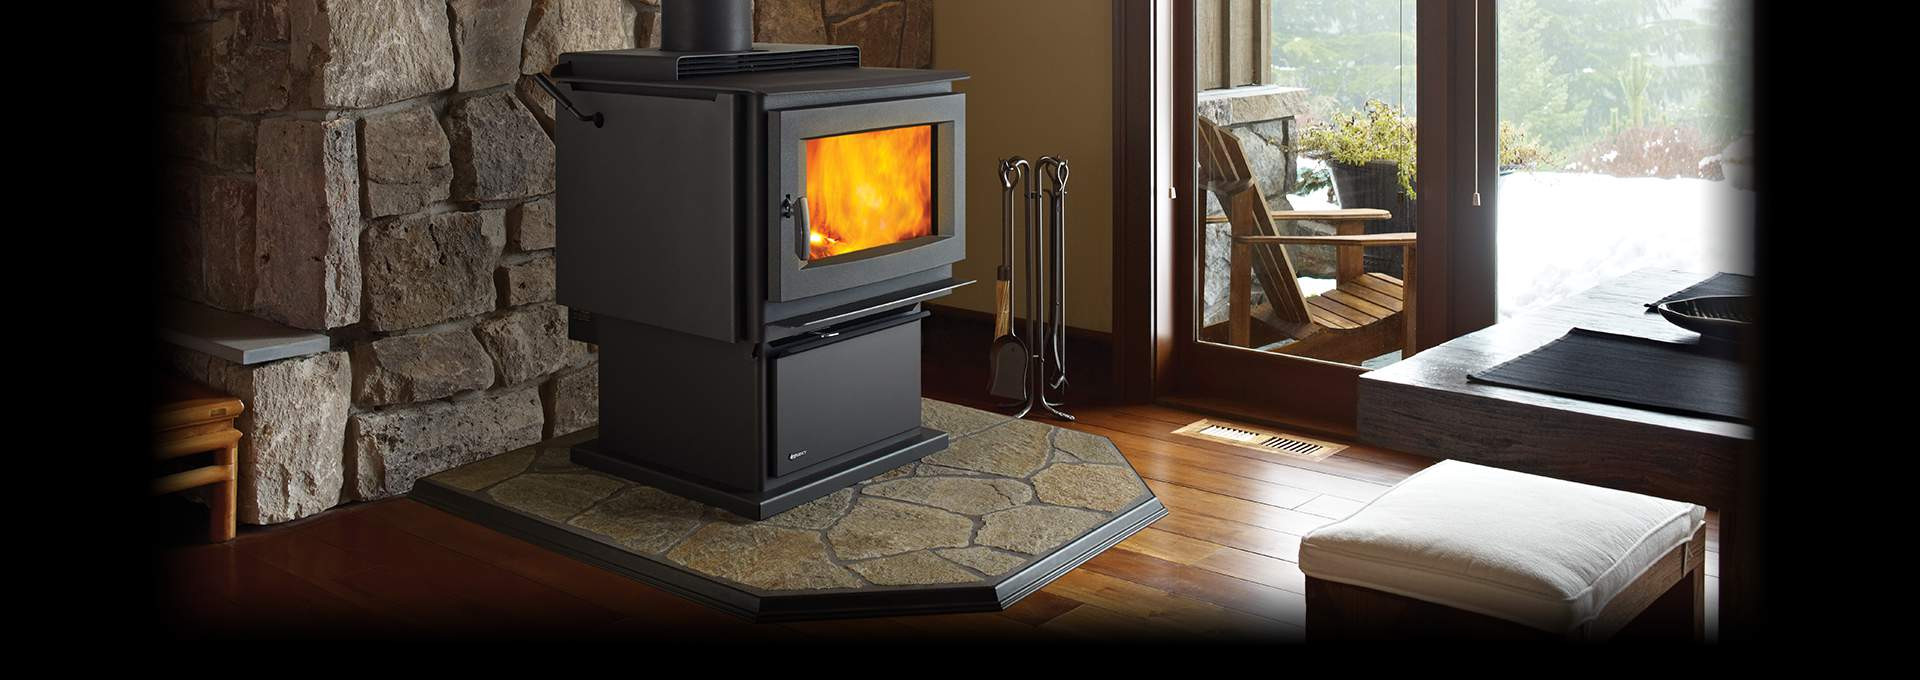 Menards Electric Fireplace New 26 Re Mended Hardwood Floor Fireplace Transition